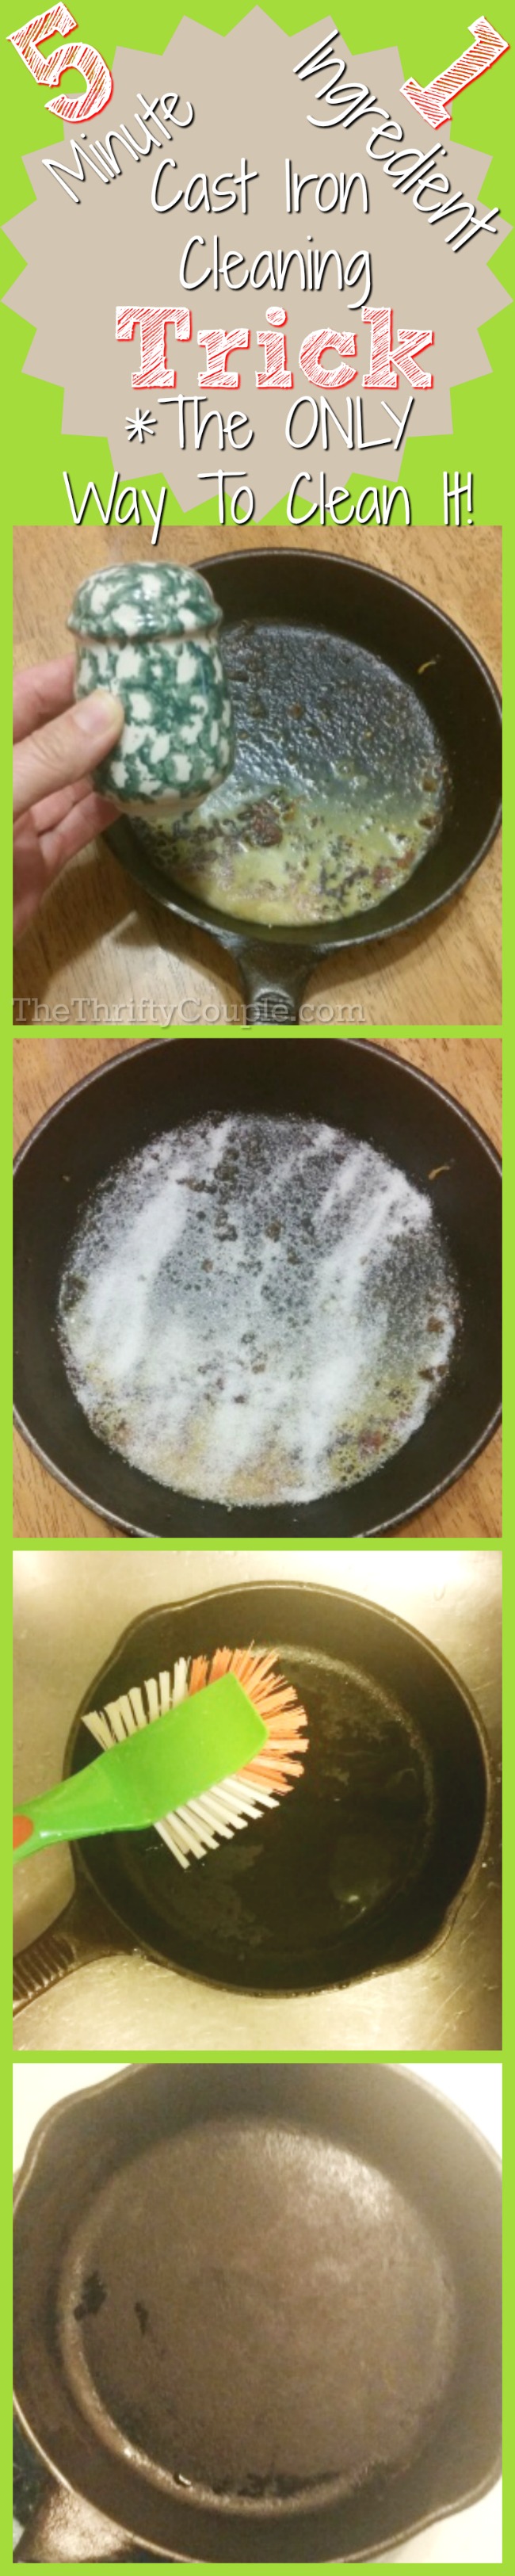 how-to-clean-cast-iron-skillet-5-minute-salt-trick